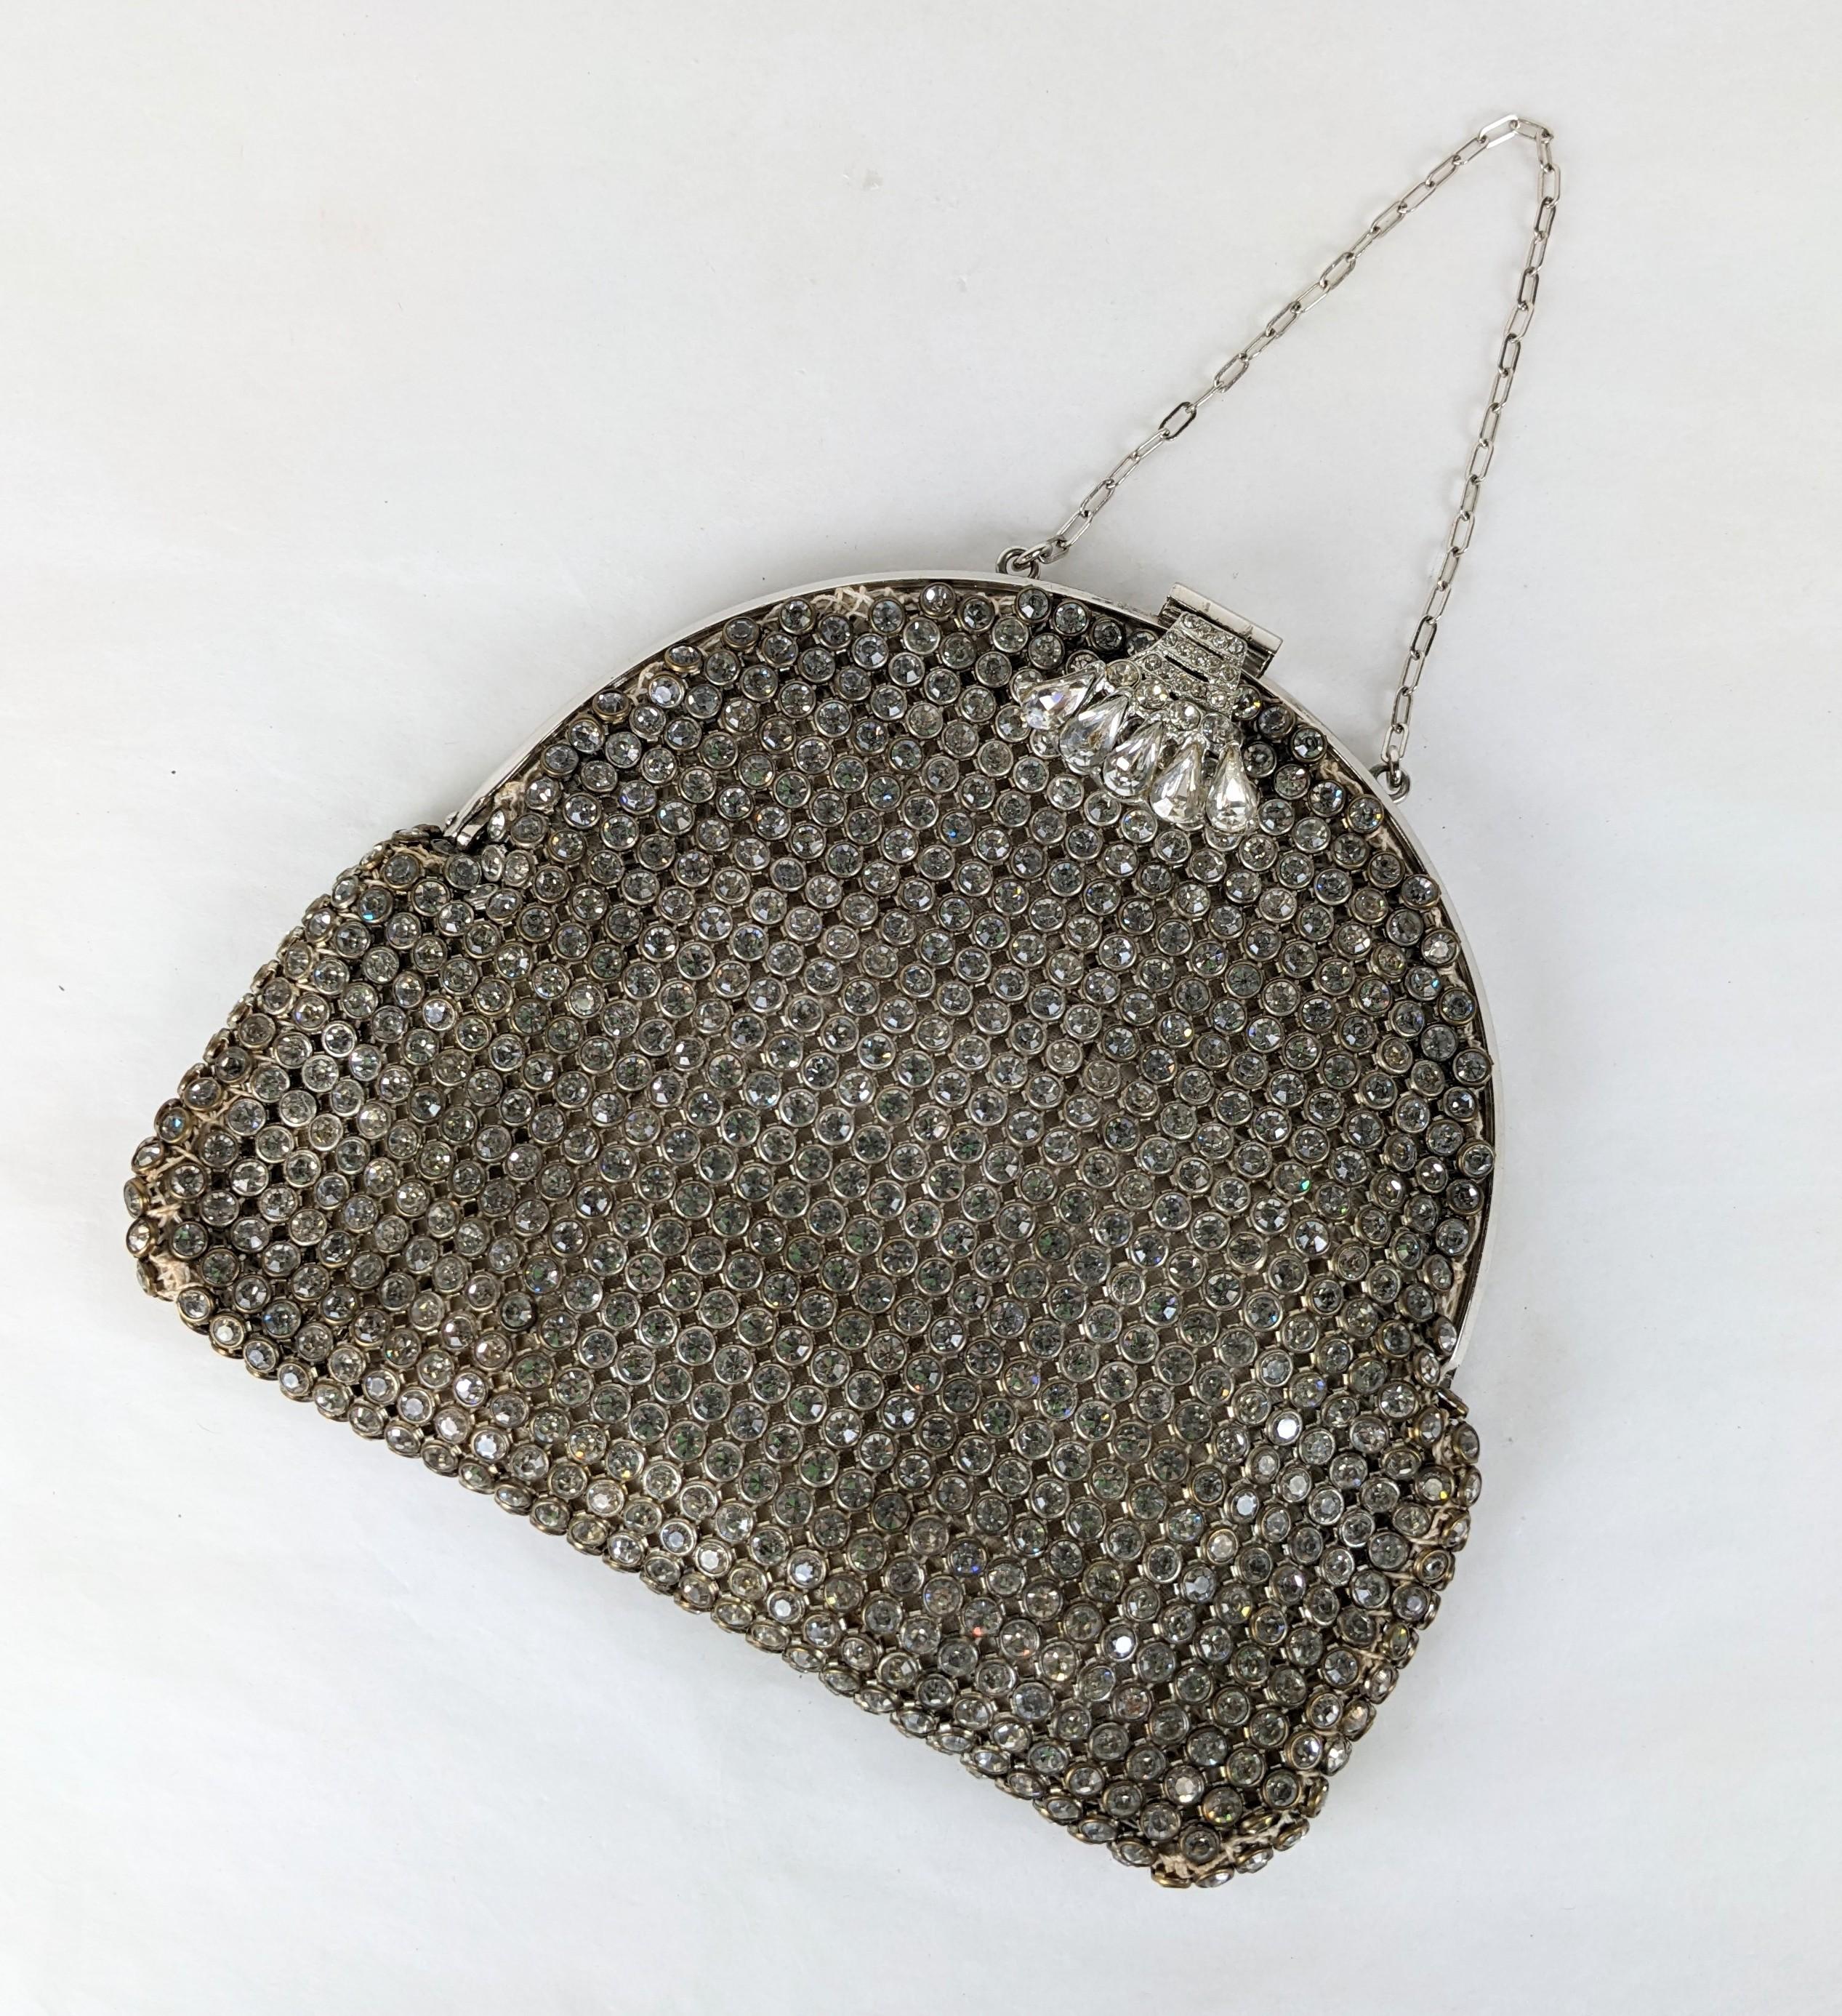 Art Deco Pave Rhinestone Bag from the 1930's. Fine quality with each stone set into a metal bezel attached to a cotton mesh ground. Rounded edge with delicate chain handle and satin lining. Clasp set with pear shaped crystals. 5